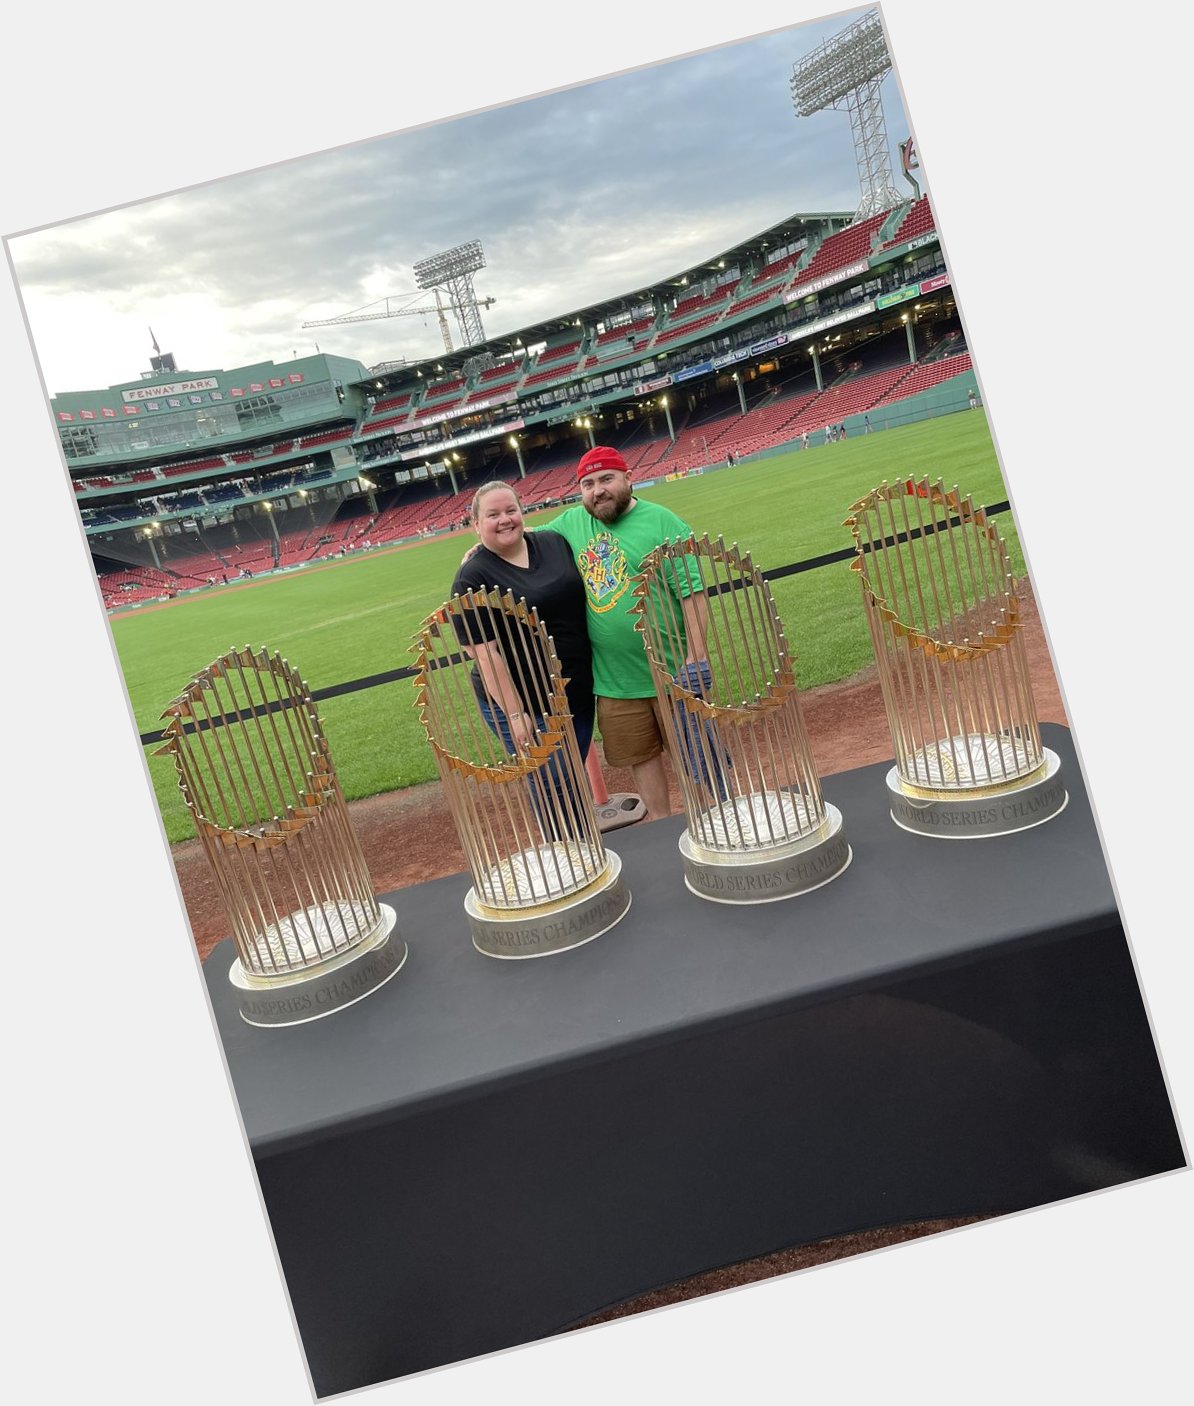 Happy birthday to me! Sox trophies and Harry Potter at Fenway park! 